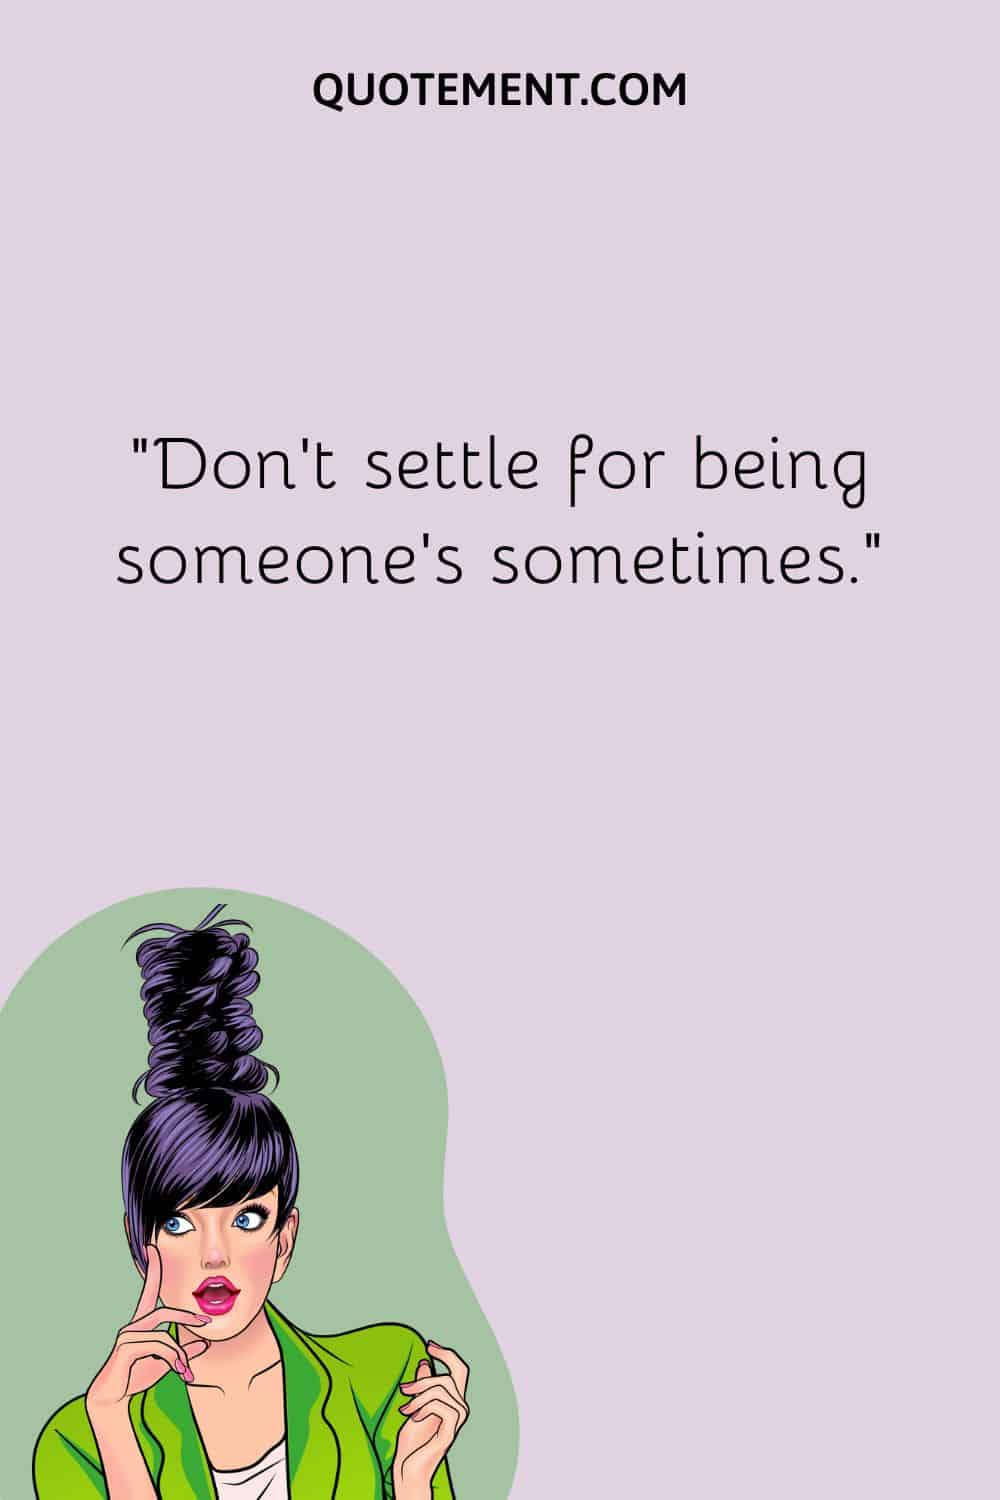 Don’t settle for being someone’s sometimes